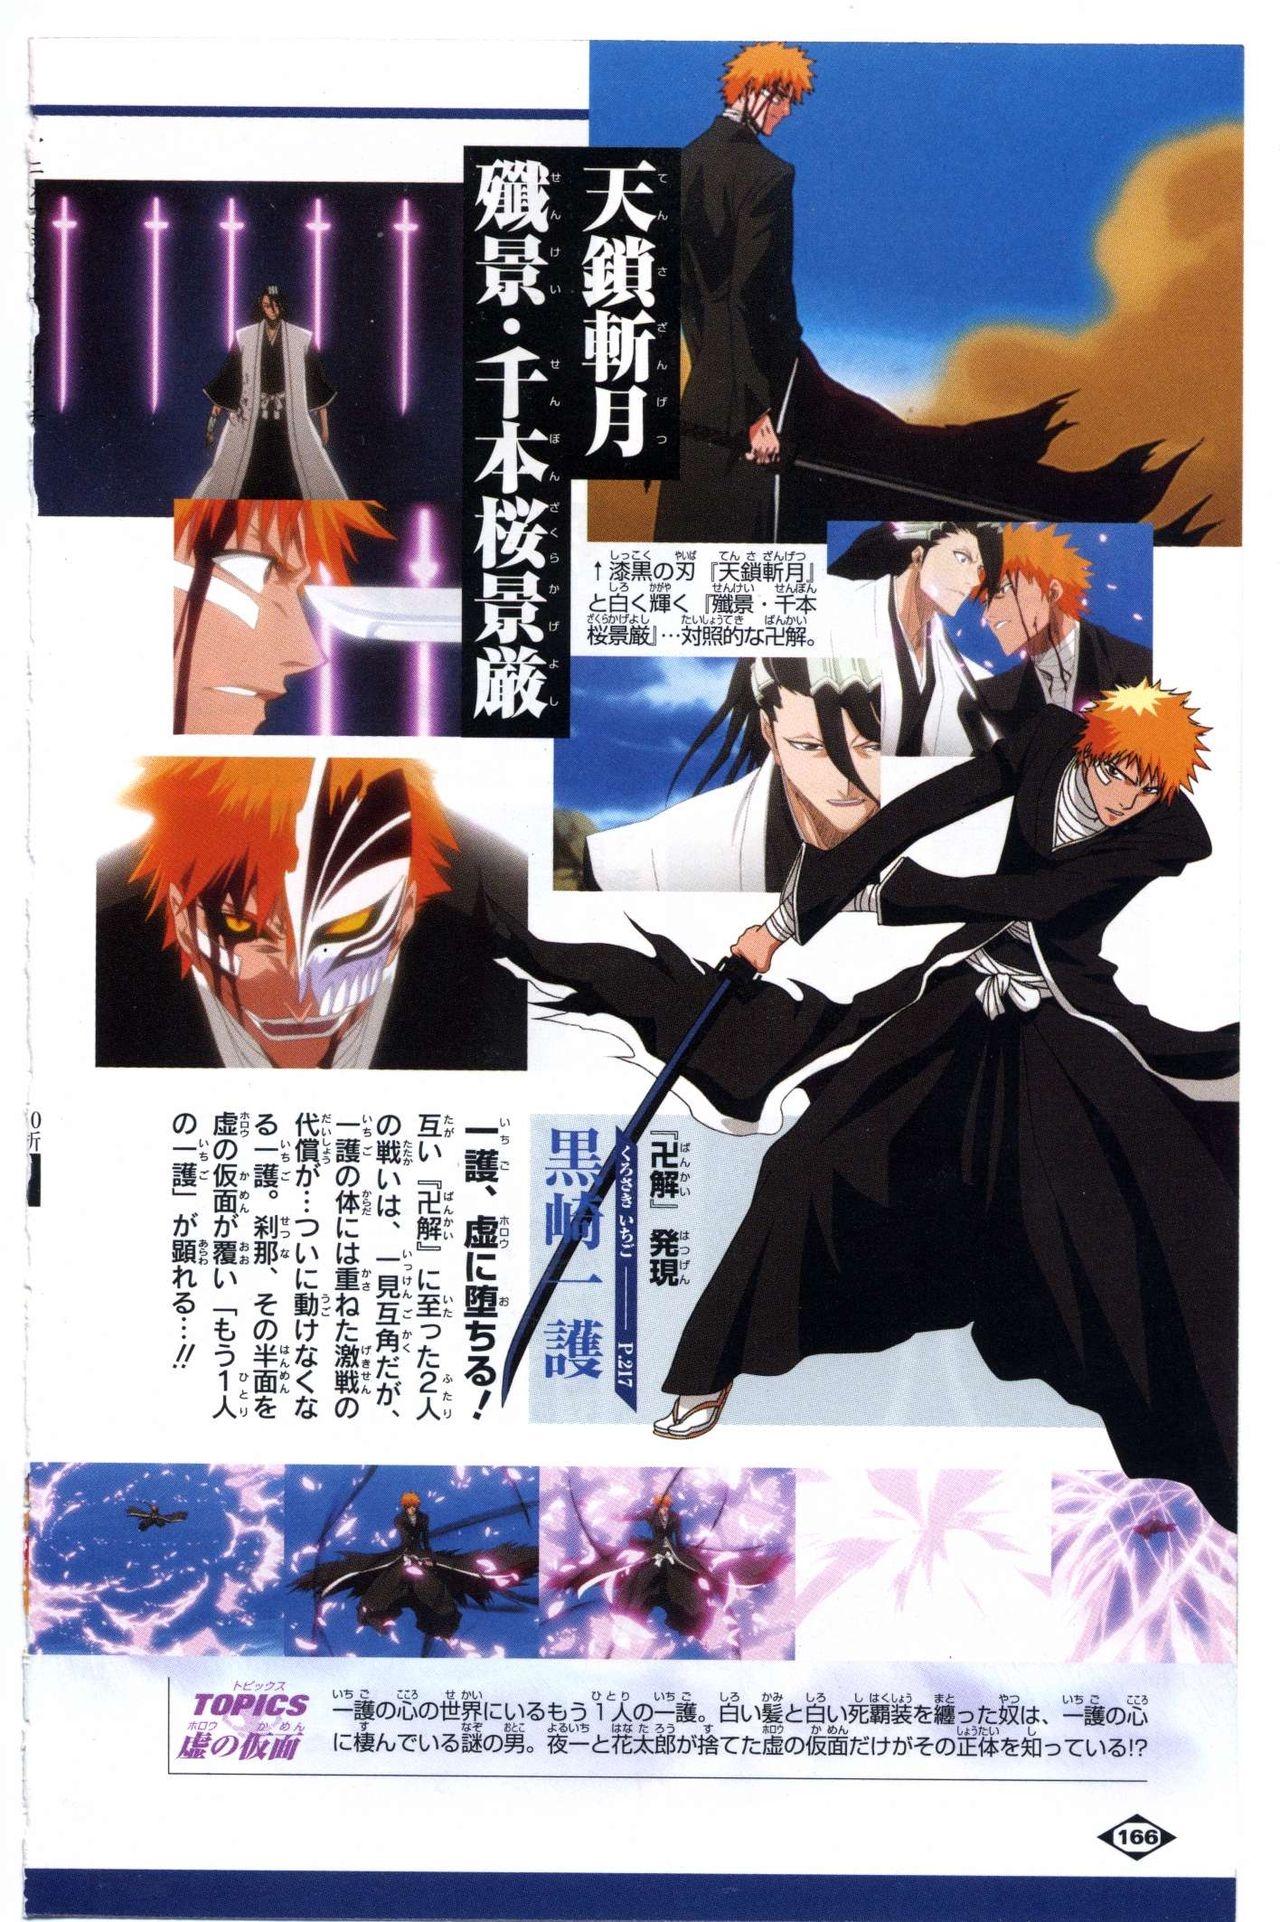 Bleach: Official Animation Book VIBEs 166